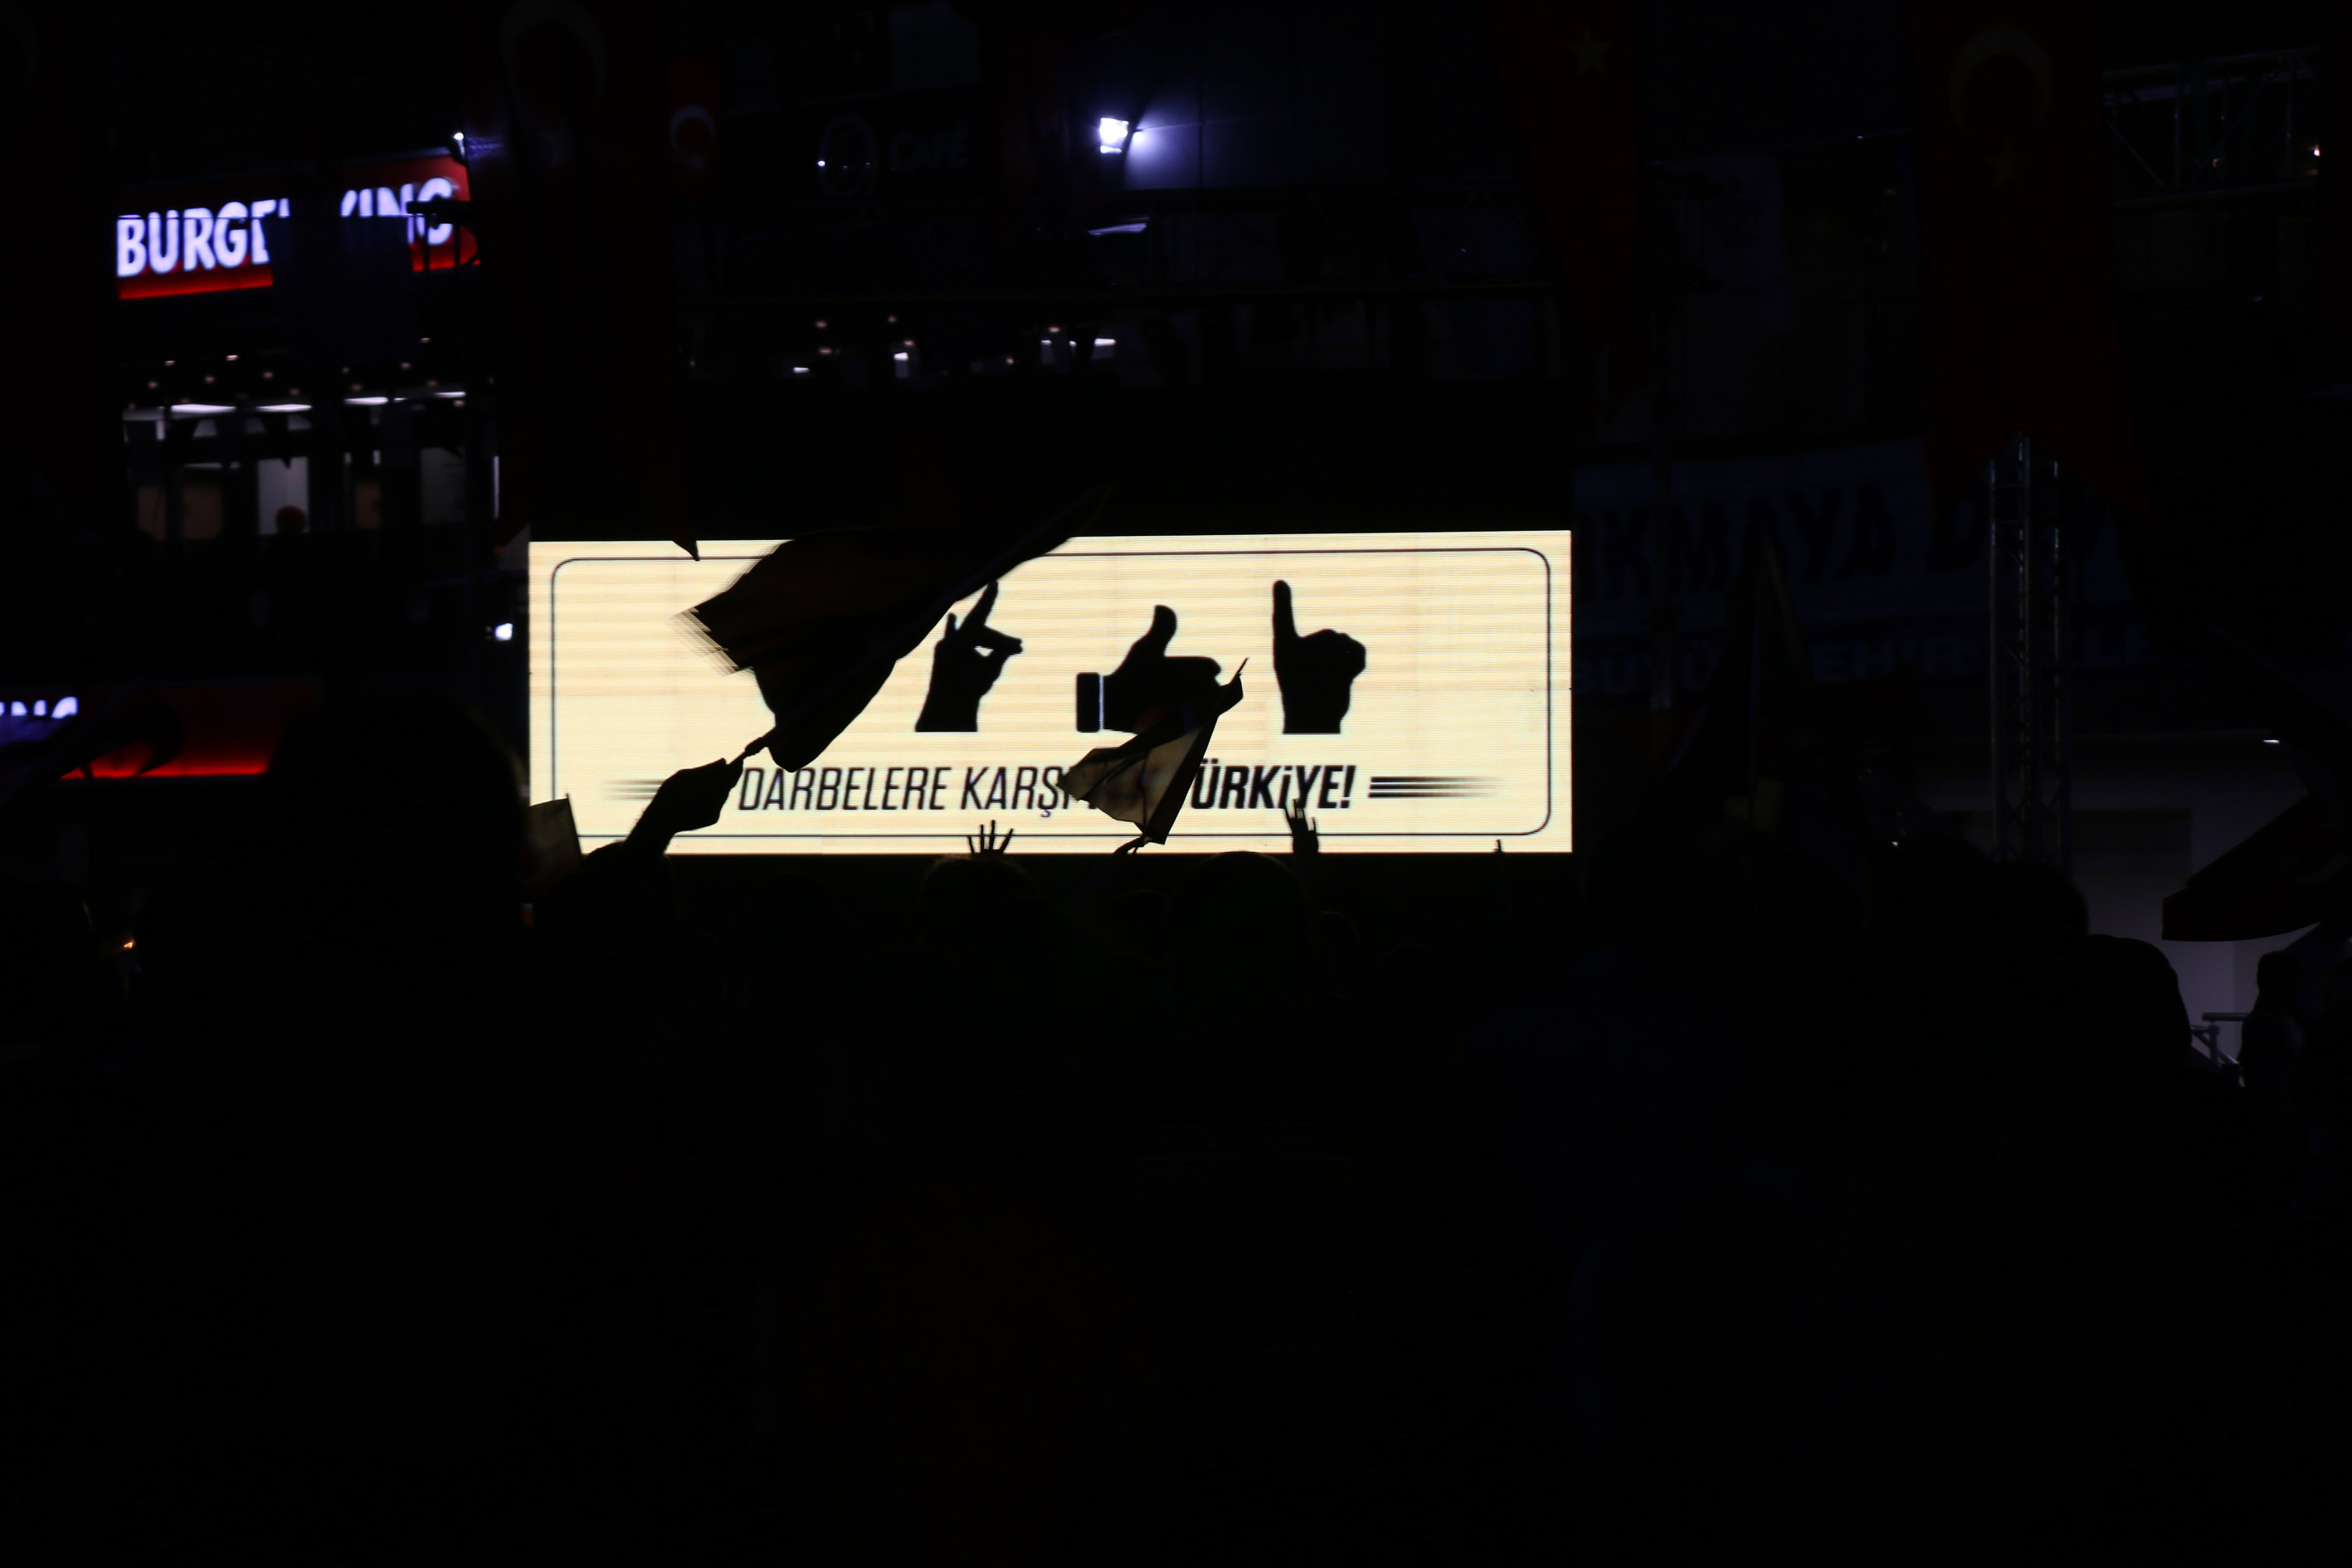 The message of solidarity reflected on screens during the democracy watch period.